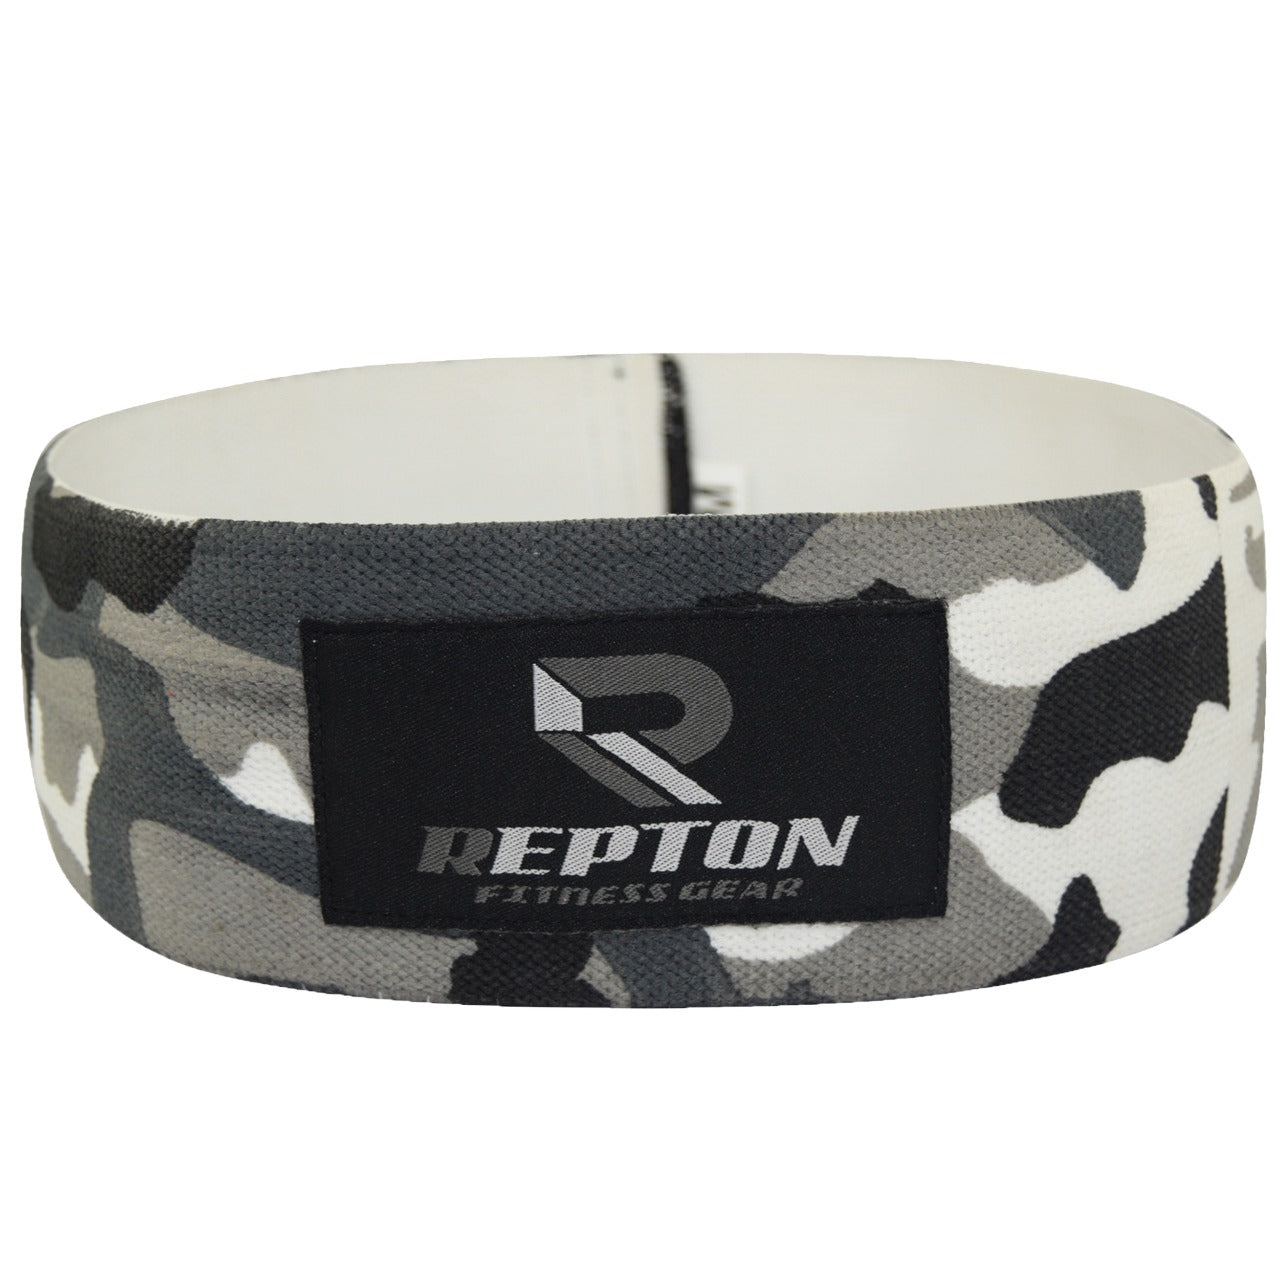 Resistance Bands Booty Bands Hip Circle Repton Fitness Gear